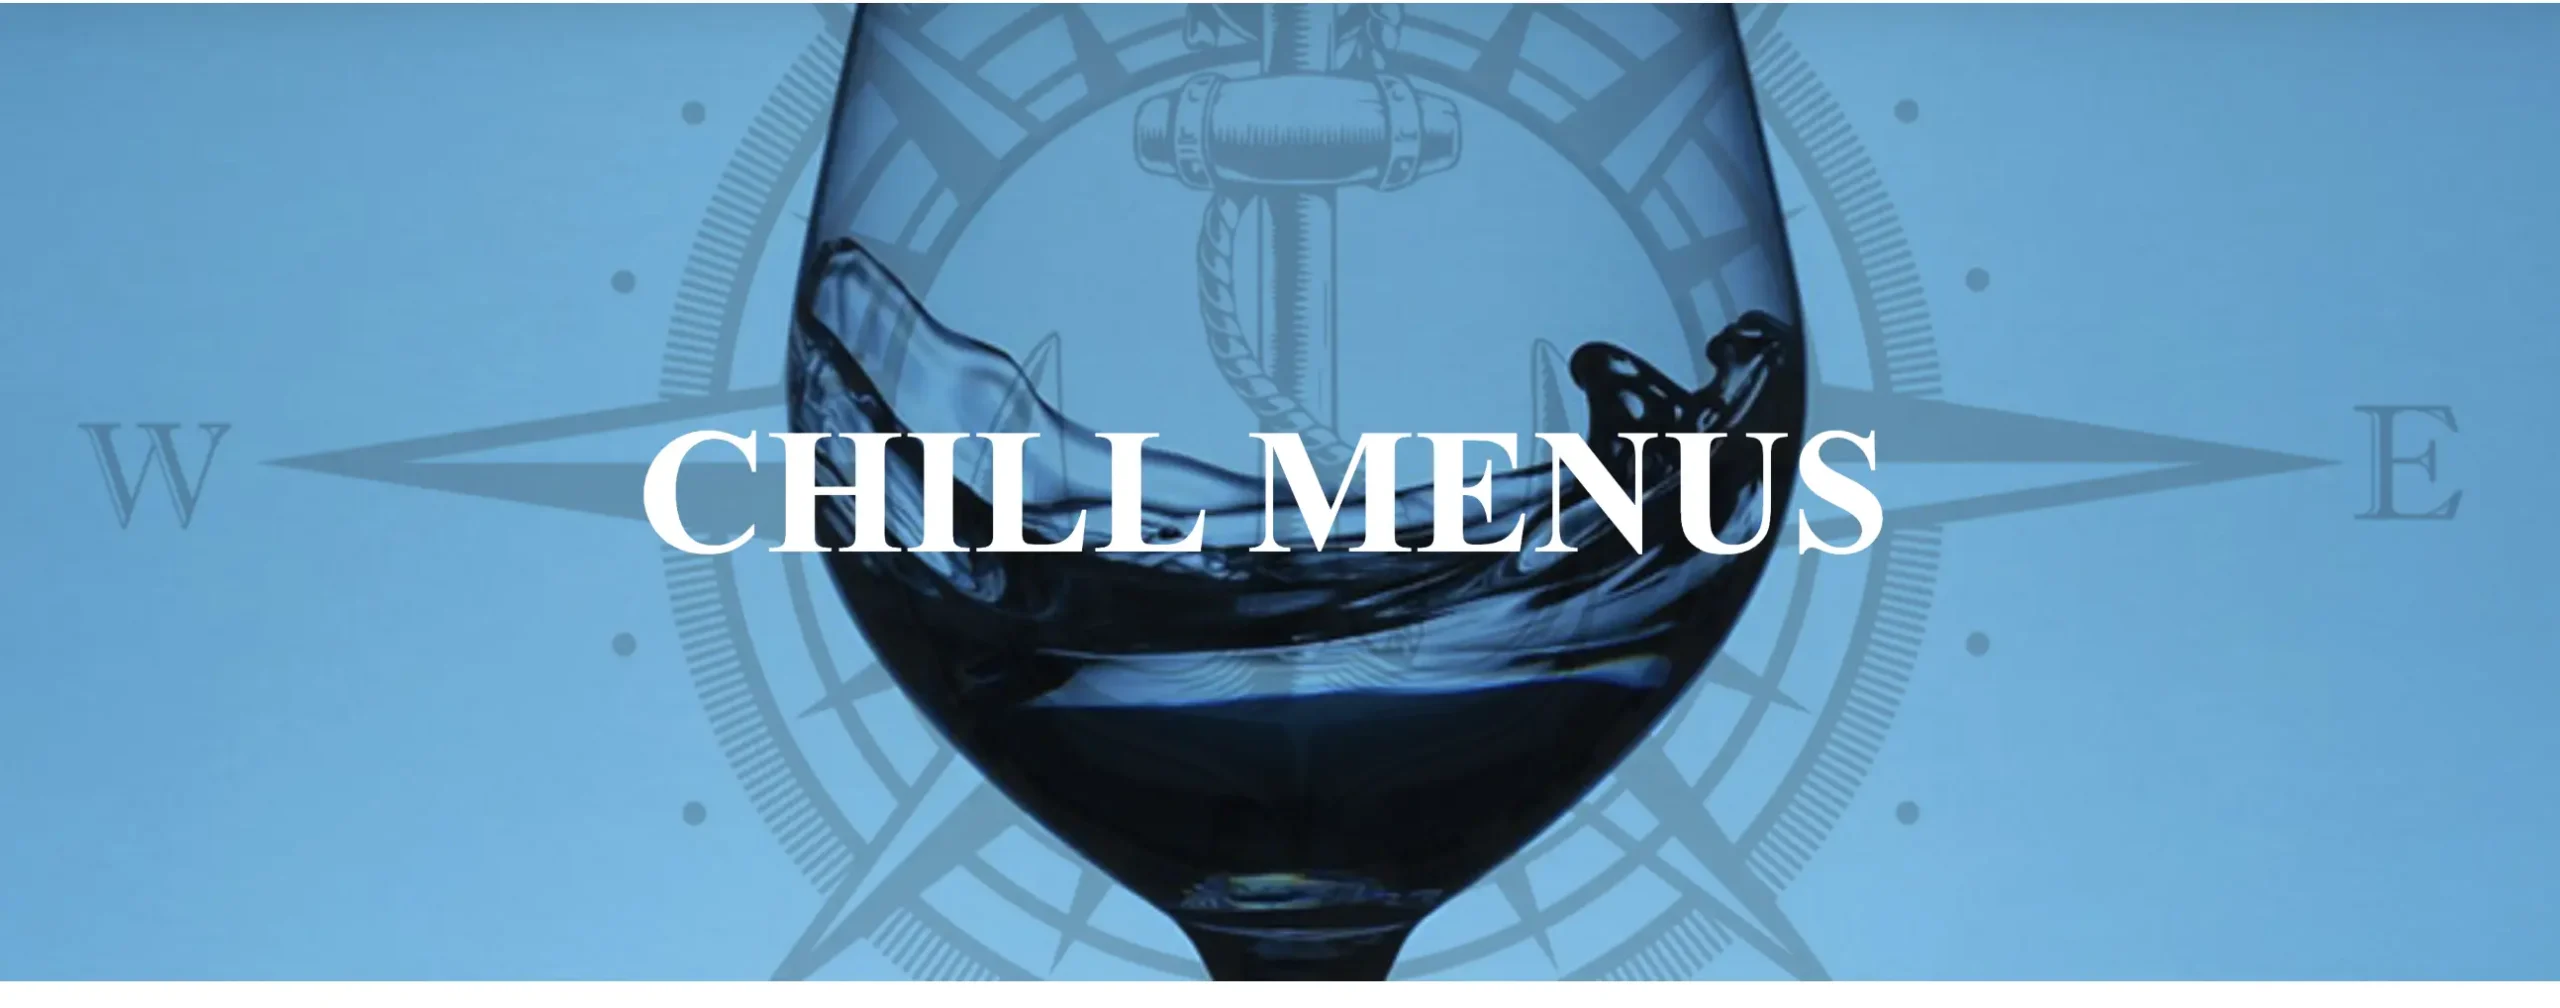 Chill Restaurant and Bar Menus scaled